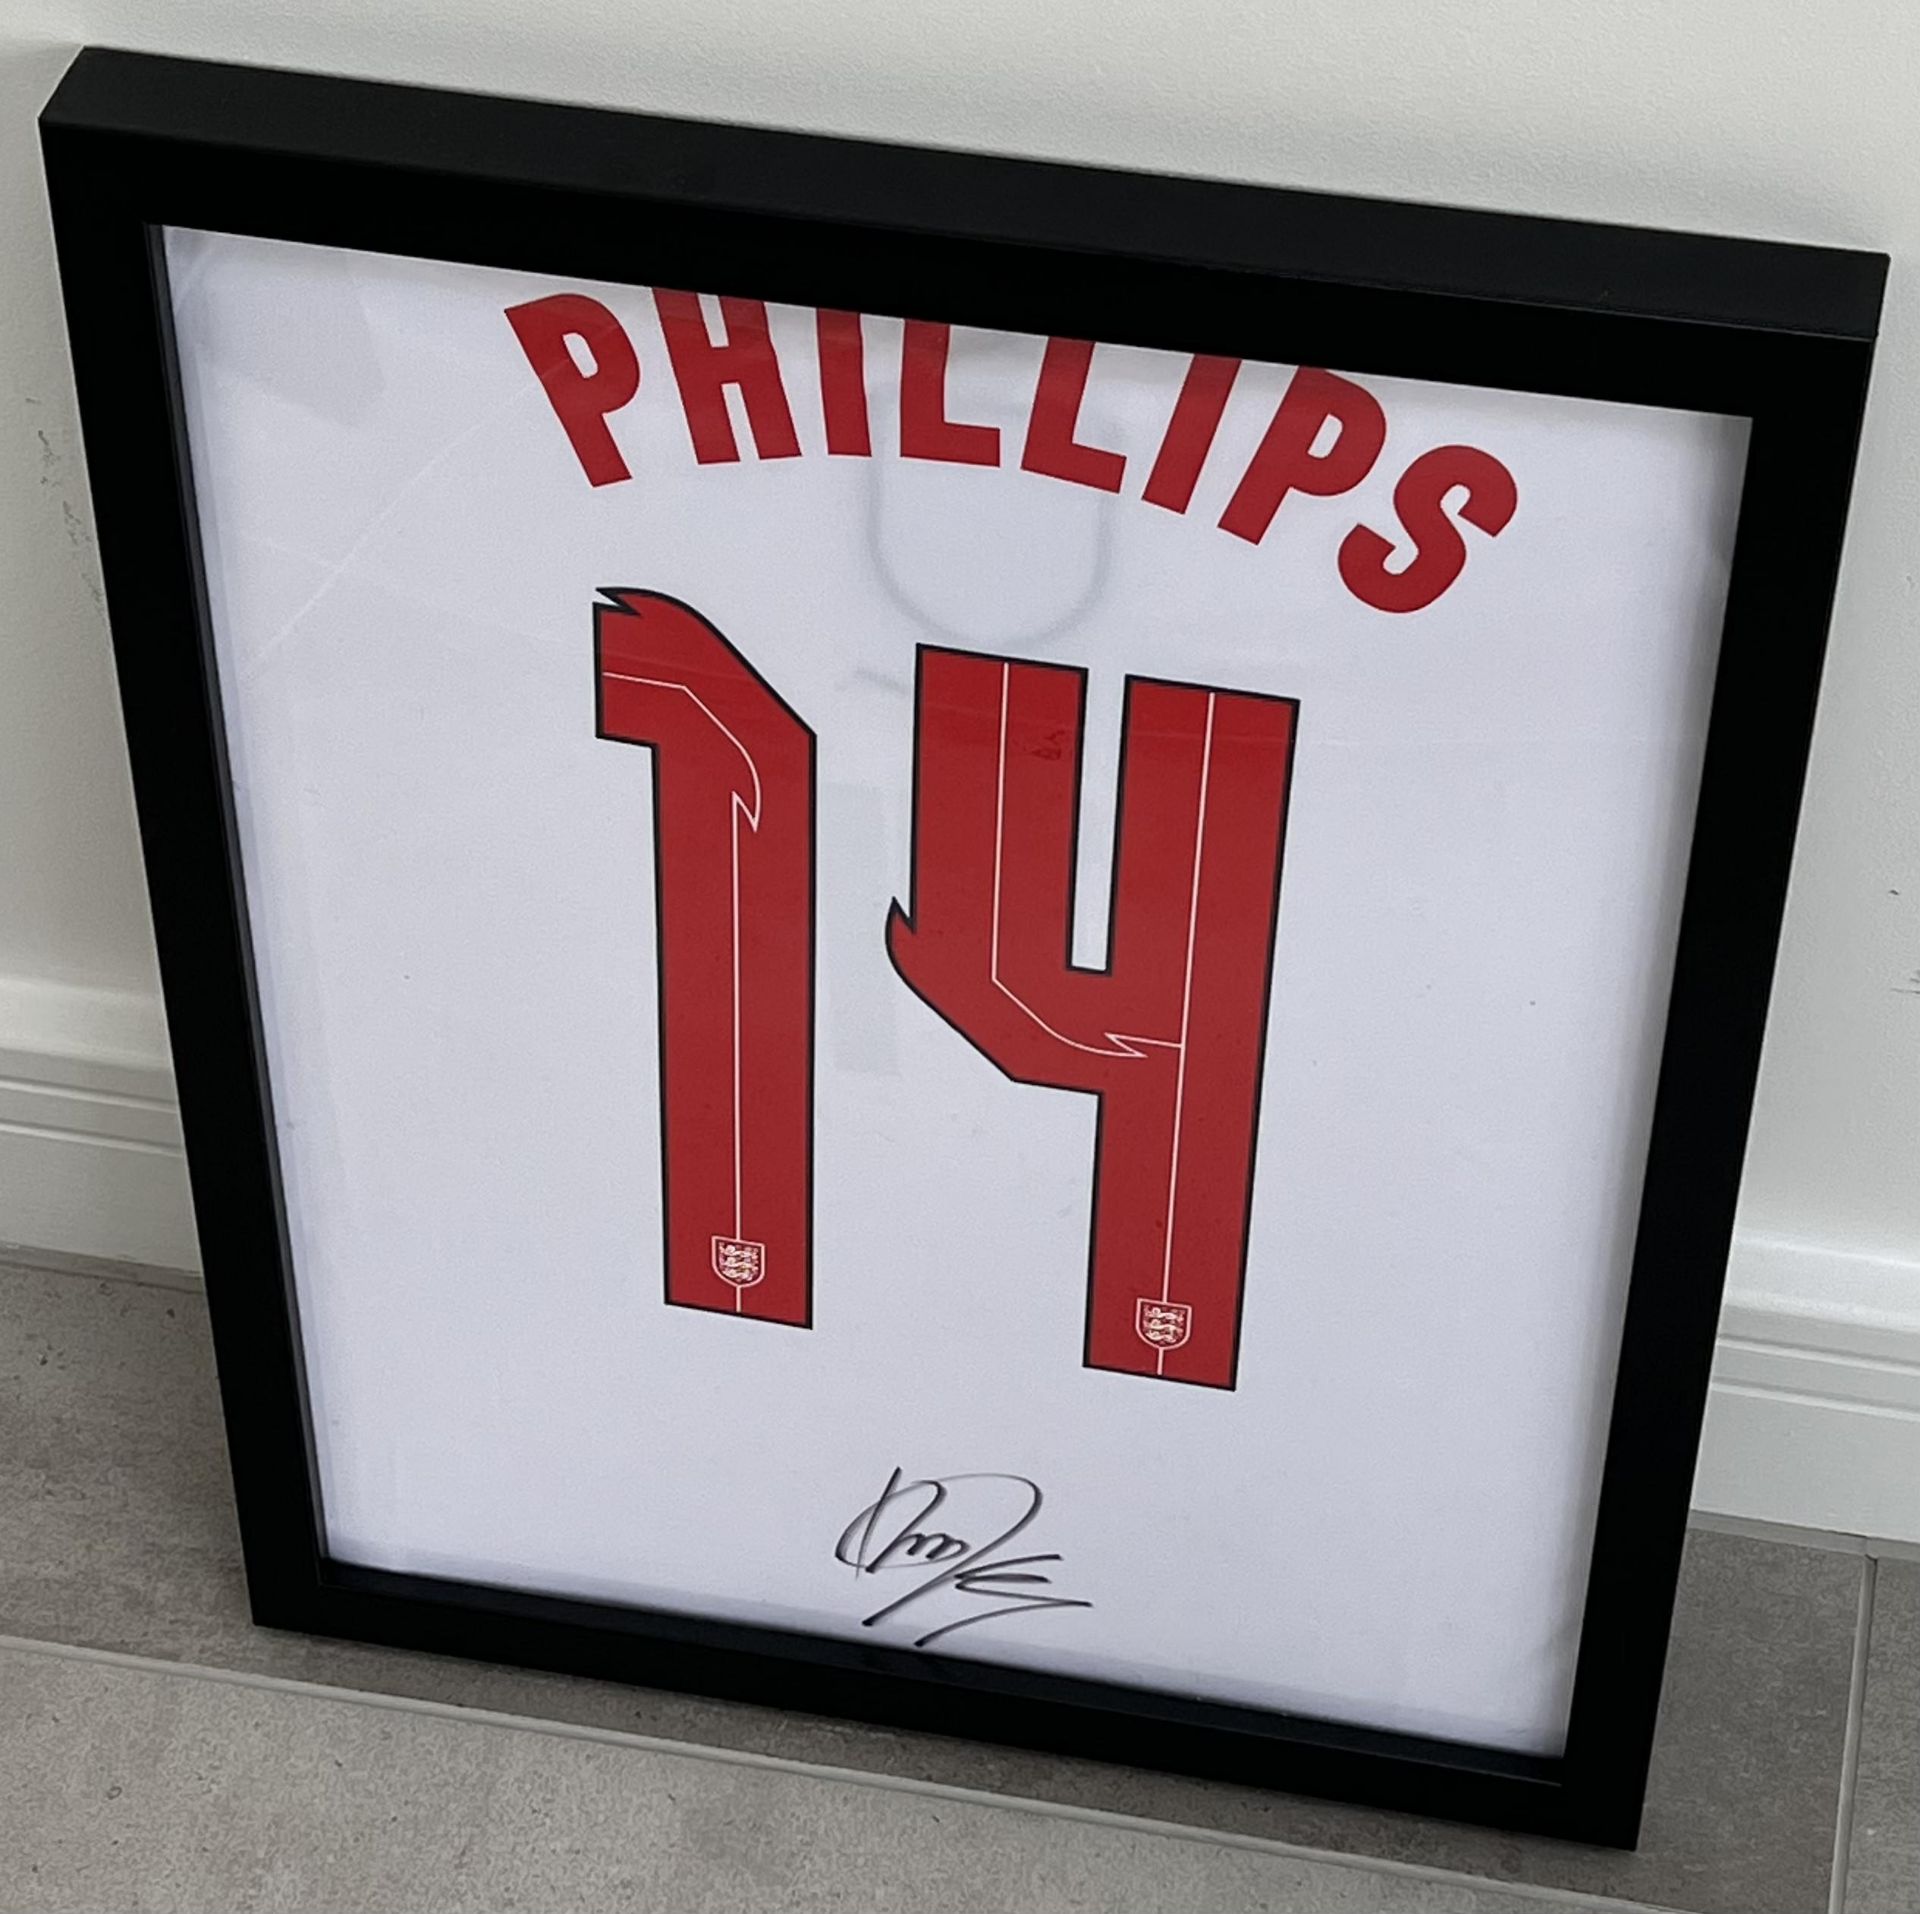 Authentic Kalvin Phillips hand signed England football shirt presentation. The shirt is displayed in - Image 3 of 5